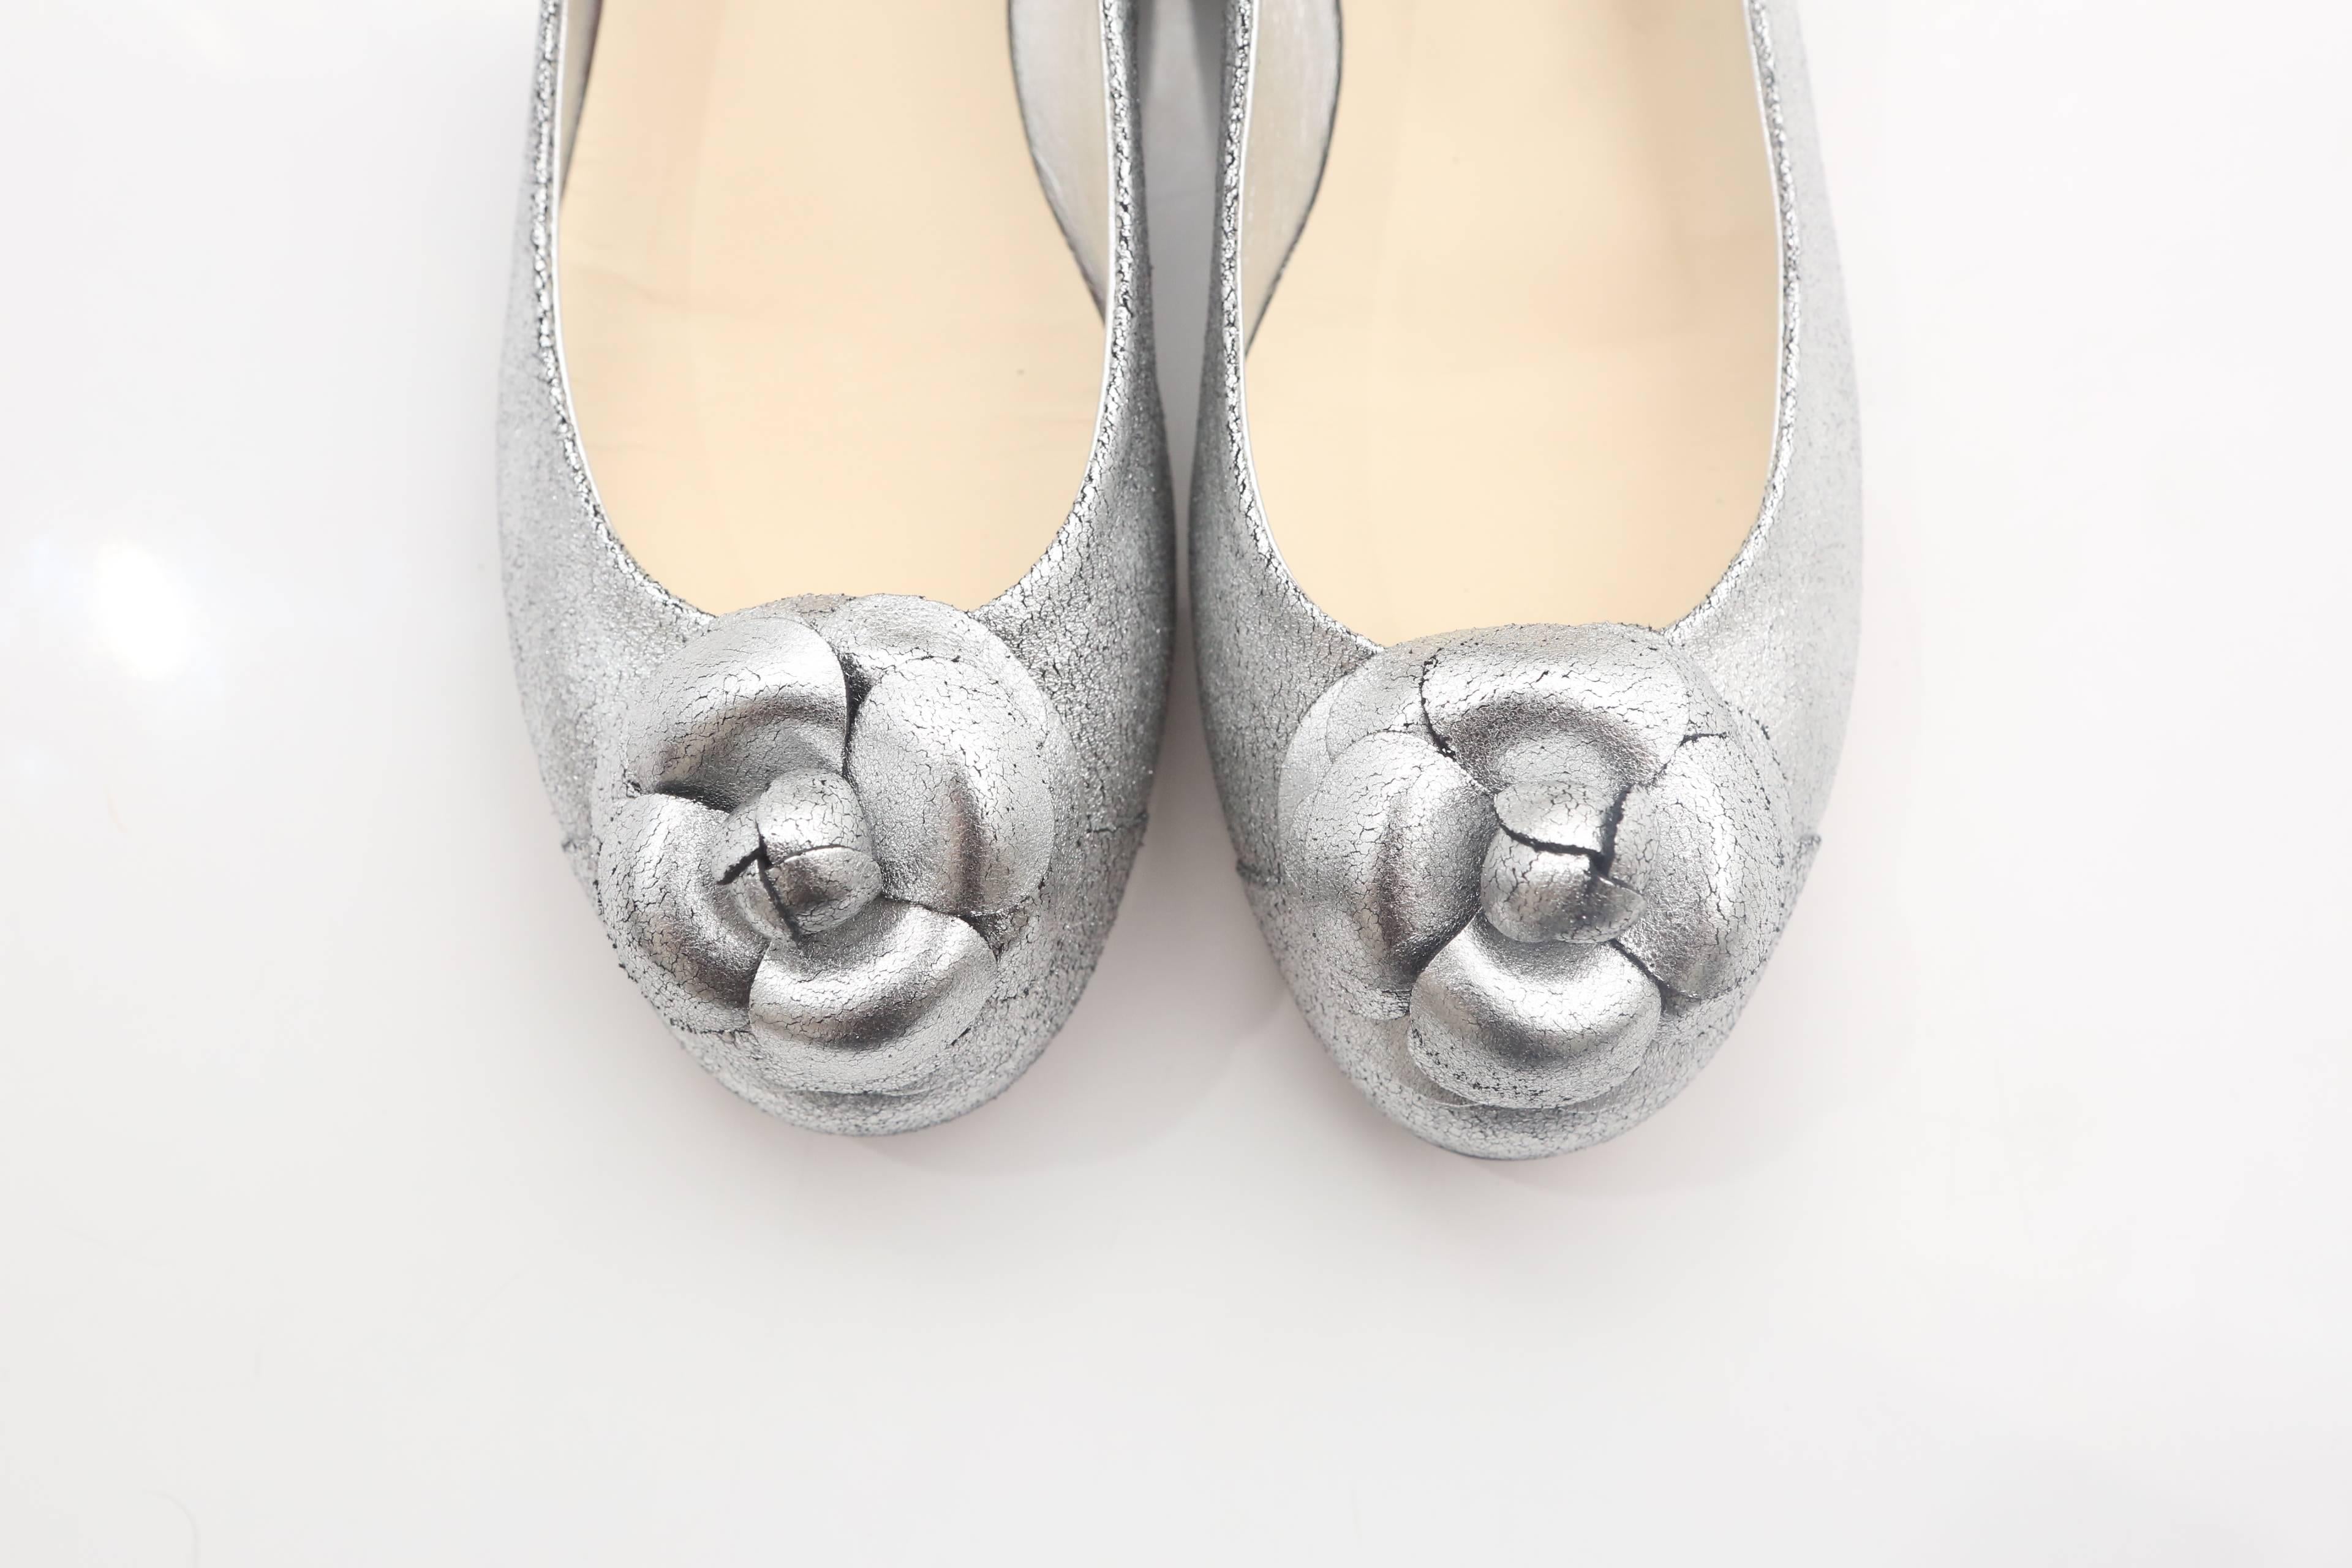 Chanel silver flats with rosette, round toe and small heel.

W/ Box